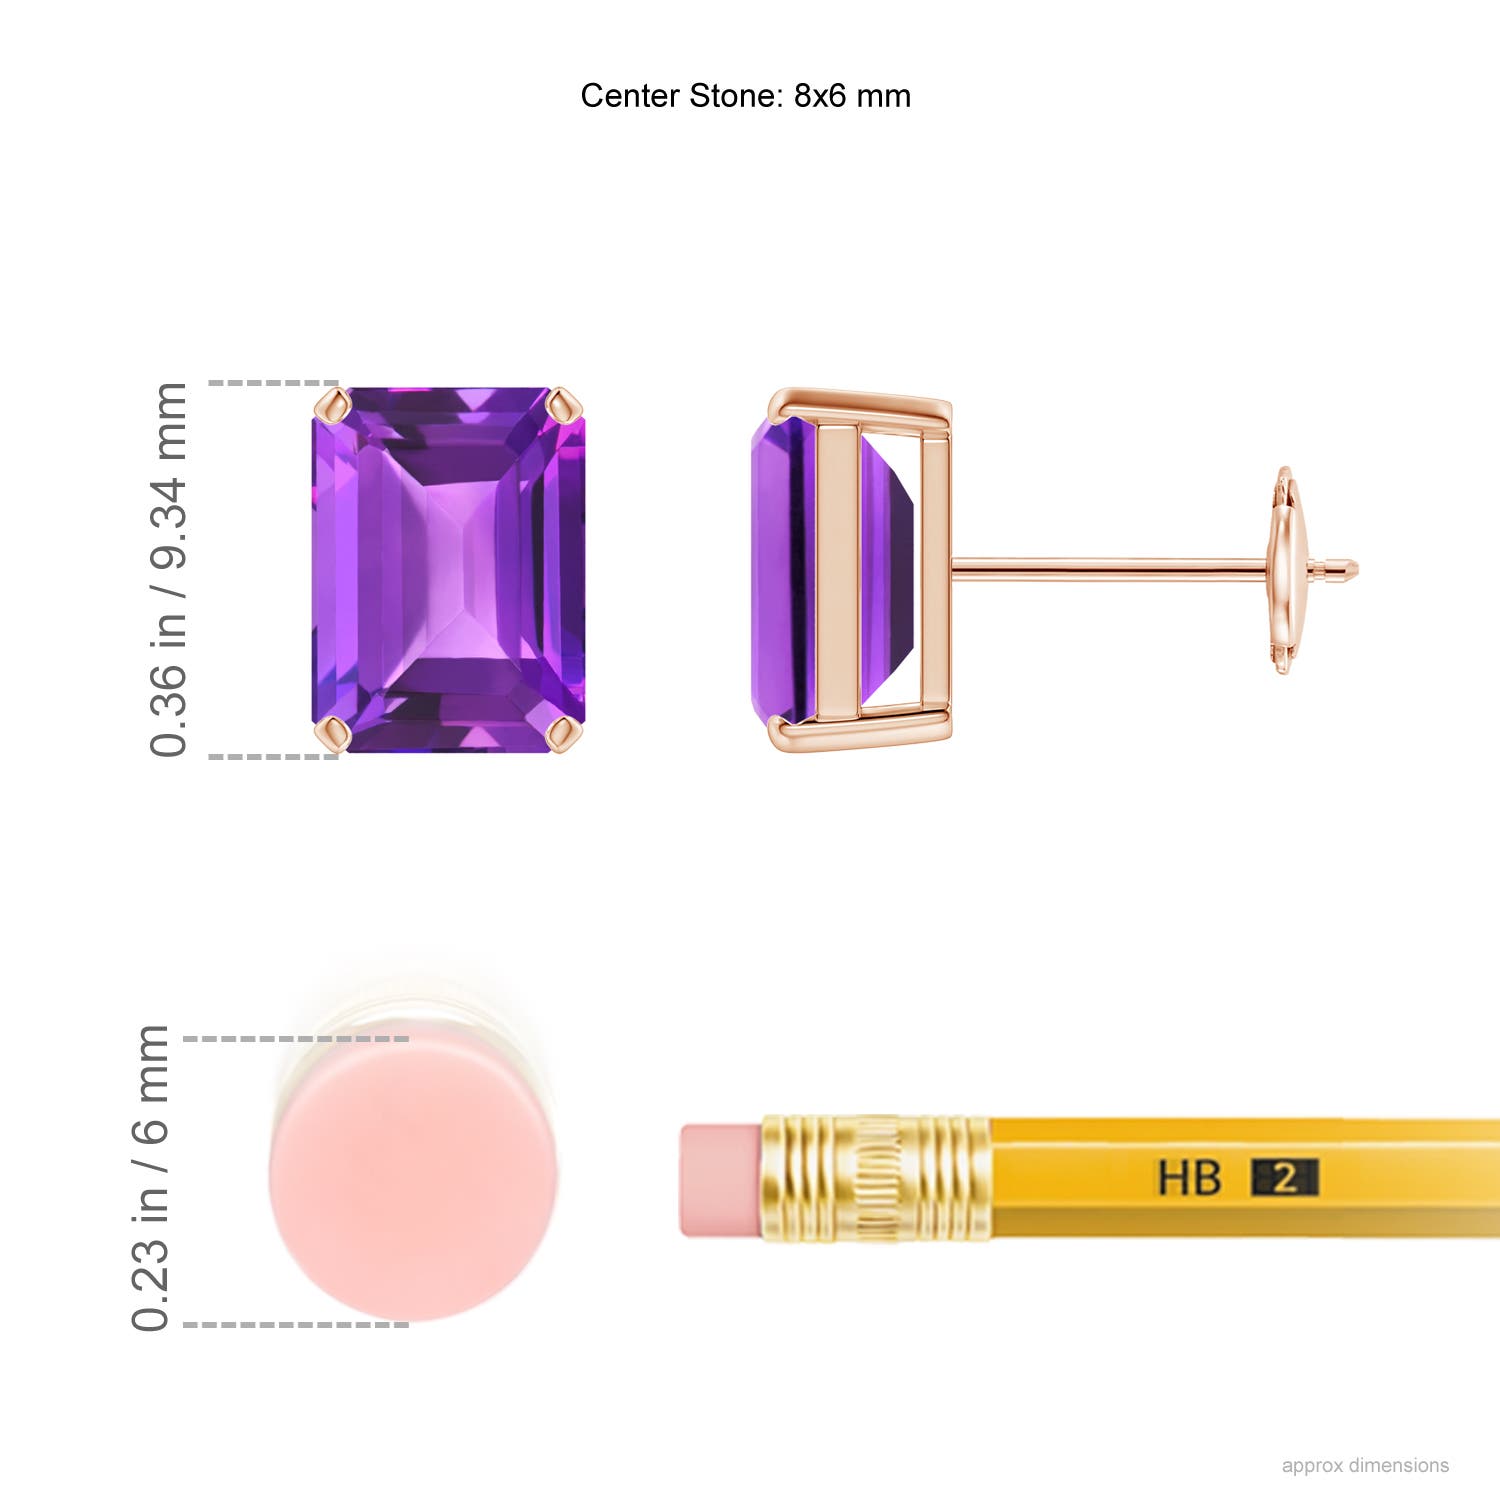 AAA - Amethyst / 3 CT / 14 KT Rose Gold